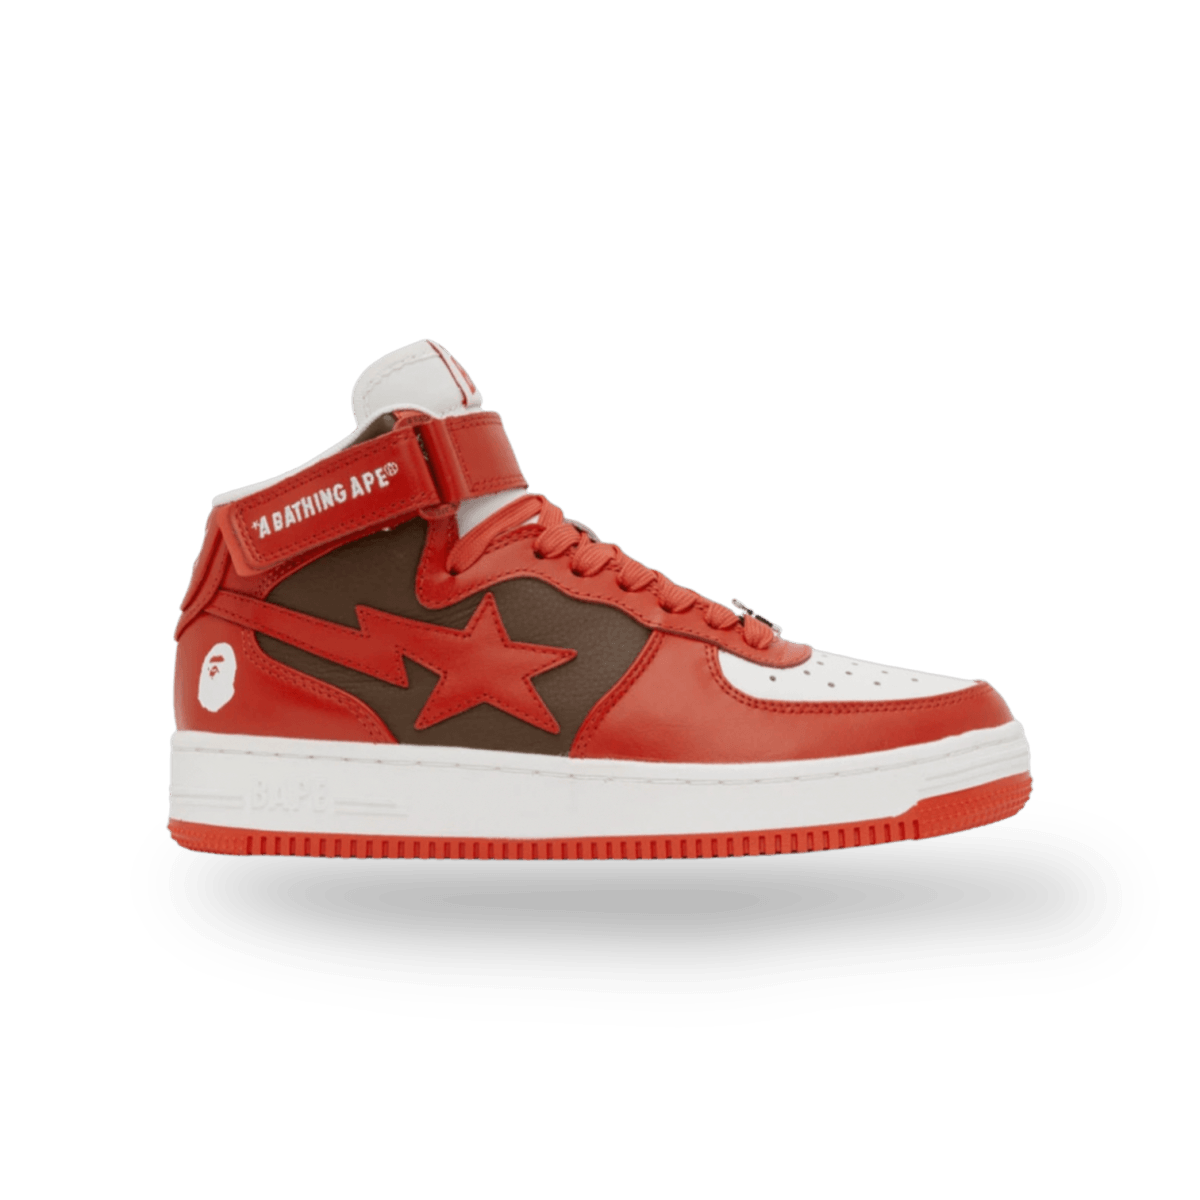 BAPE Red Sta #2 M1 Mid Sneakers - Mid Sneaker - Bape - Jawns on Fire